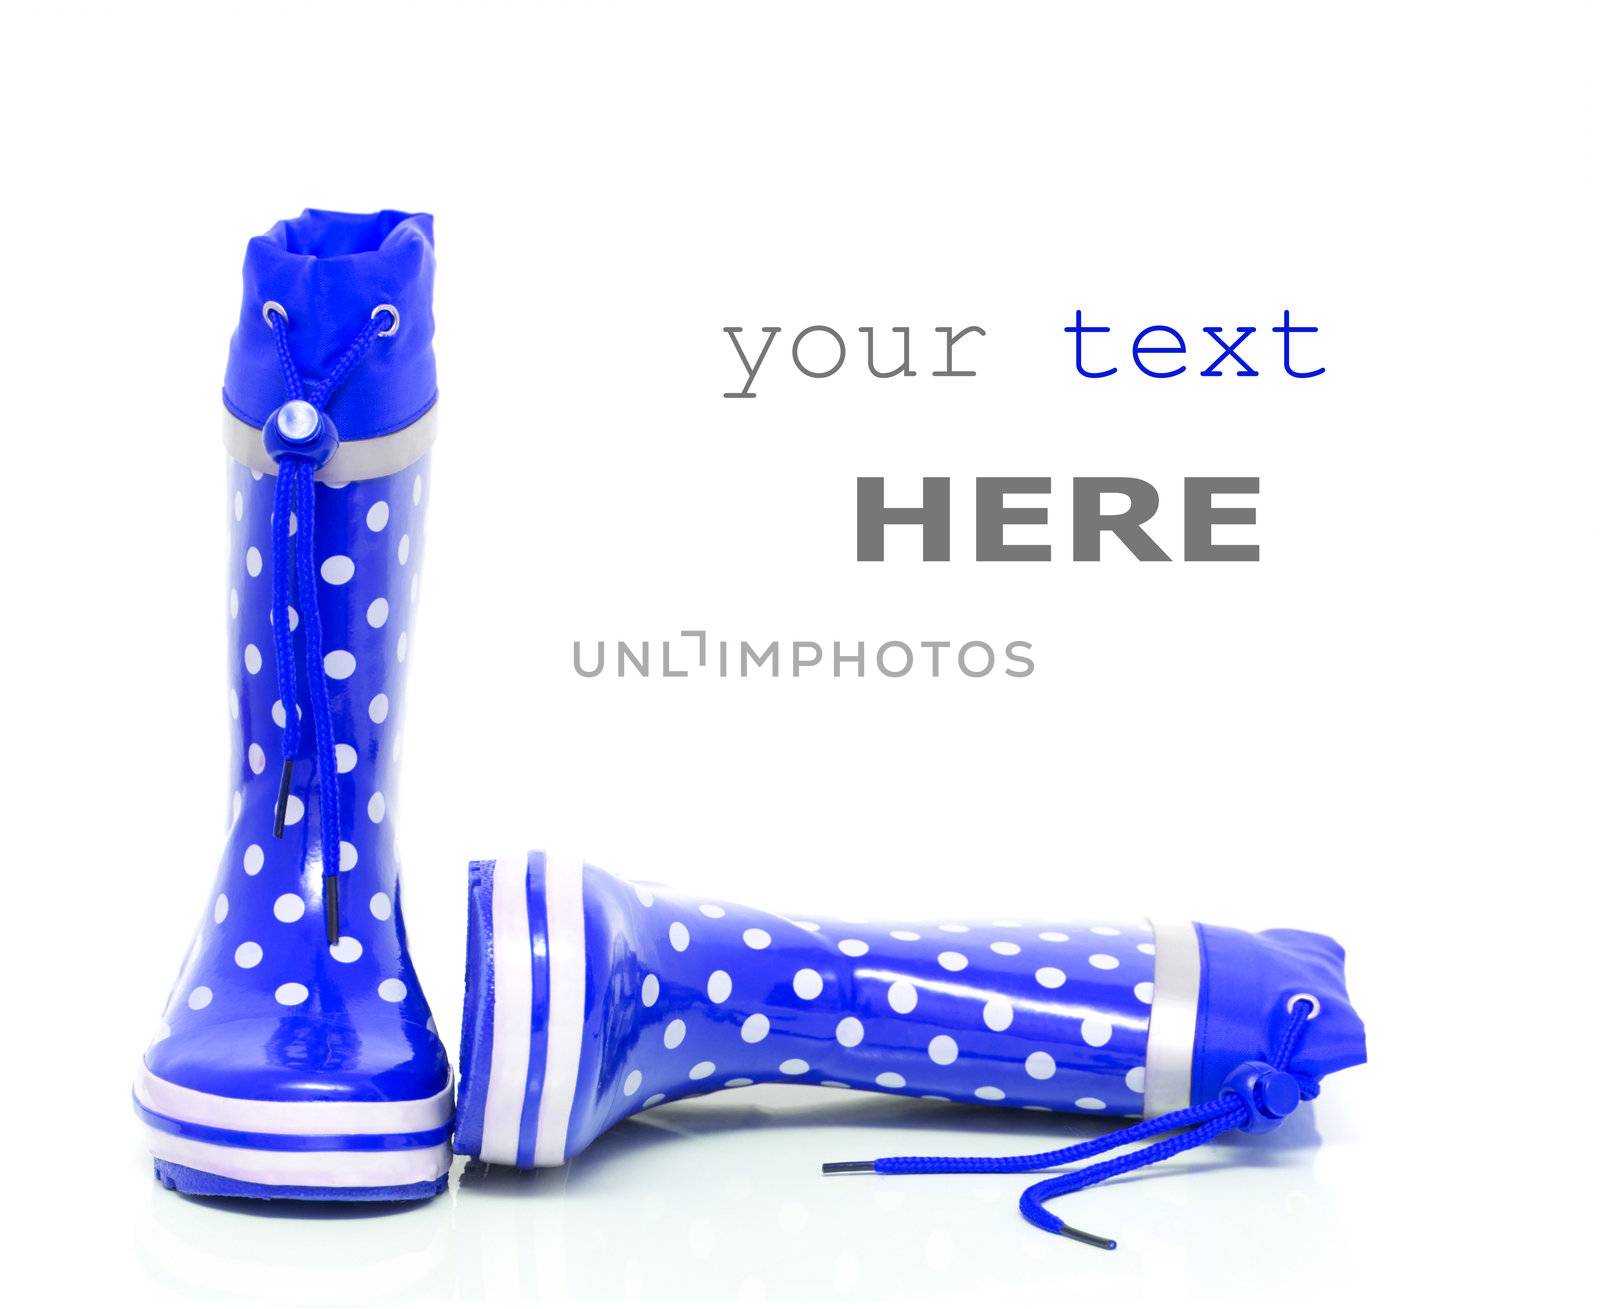 Blue rubber boots for kids isolated on white background (with space for text)